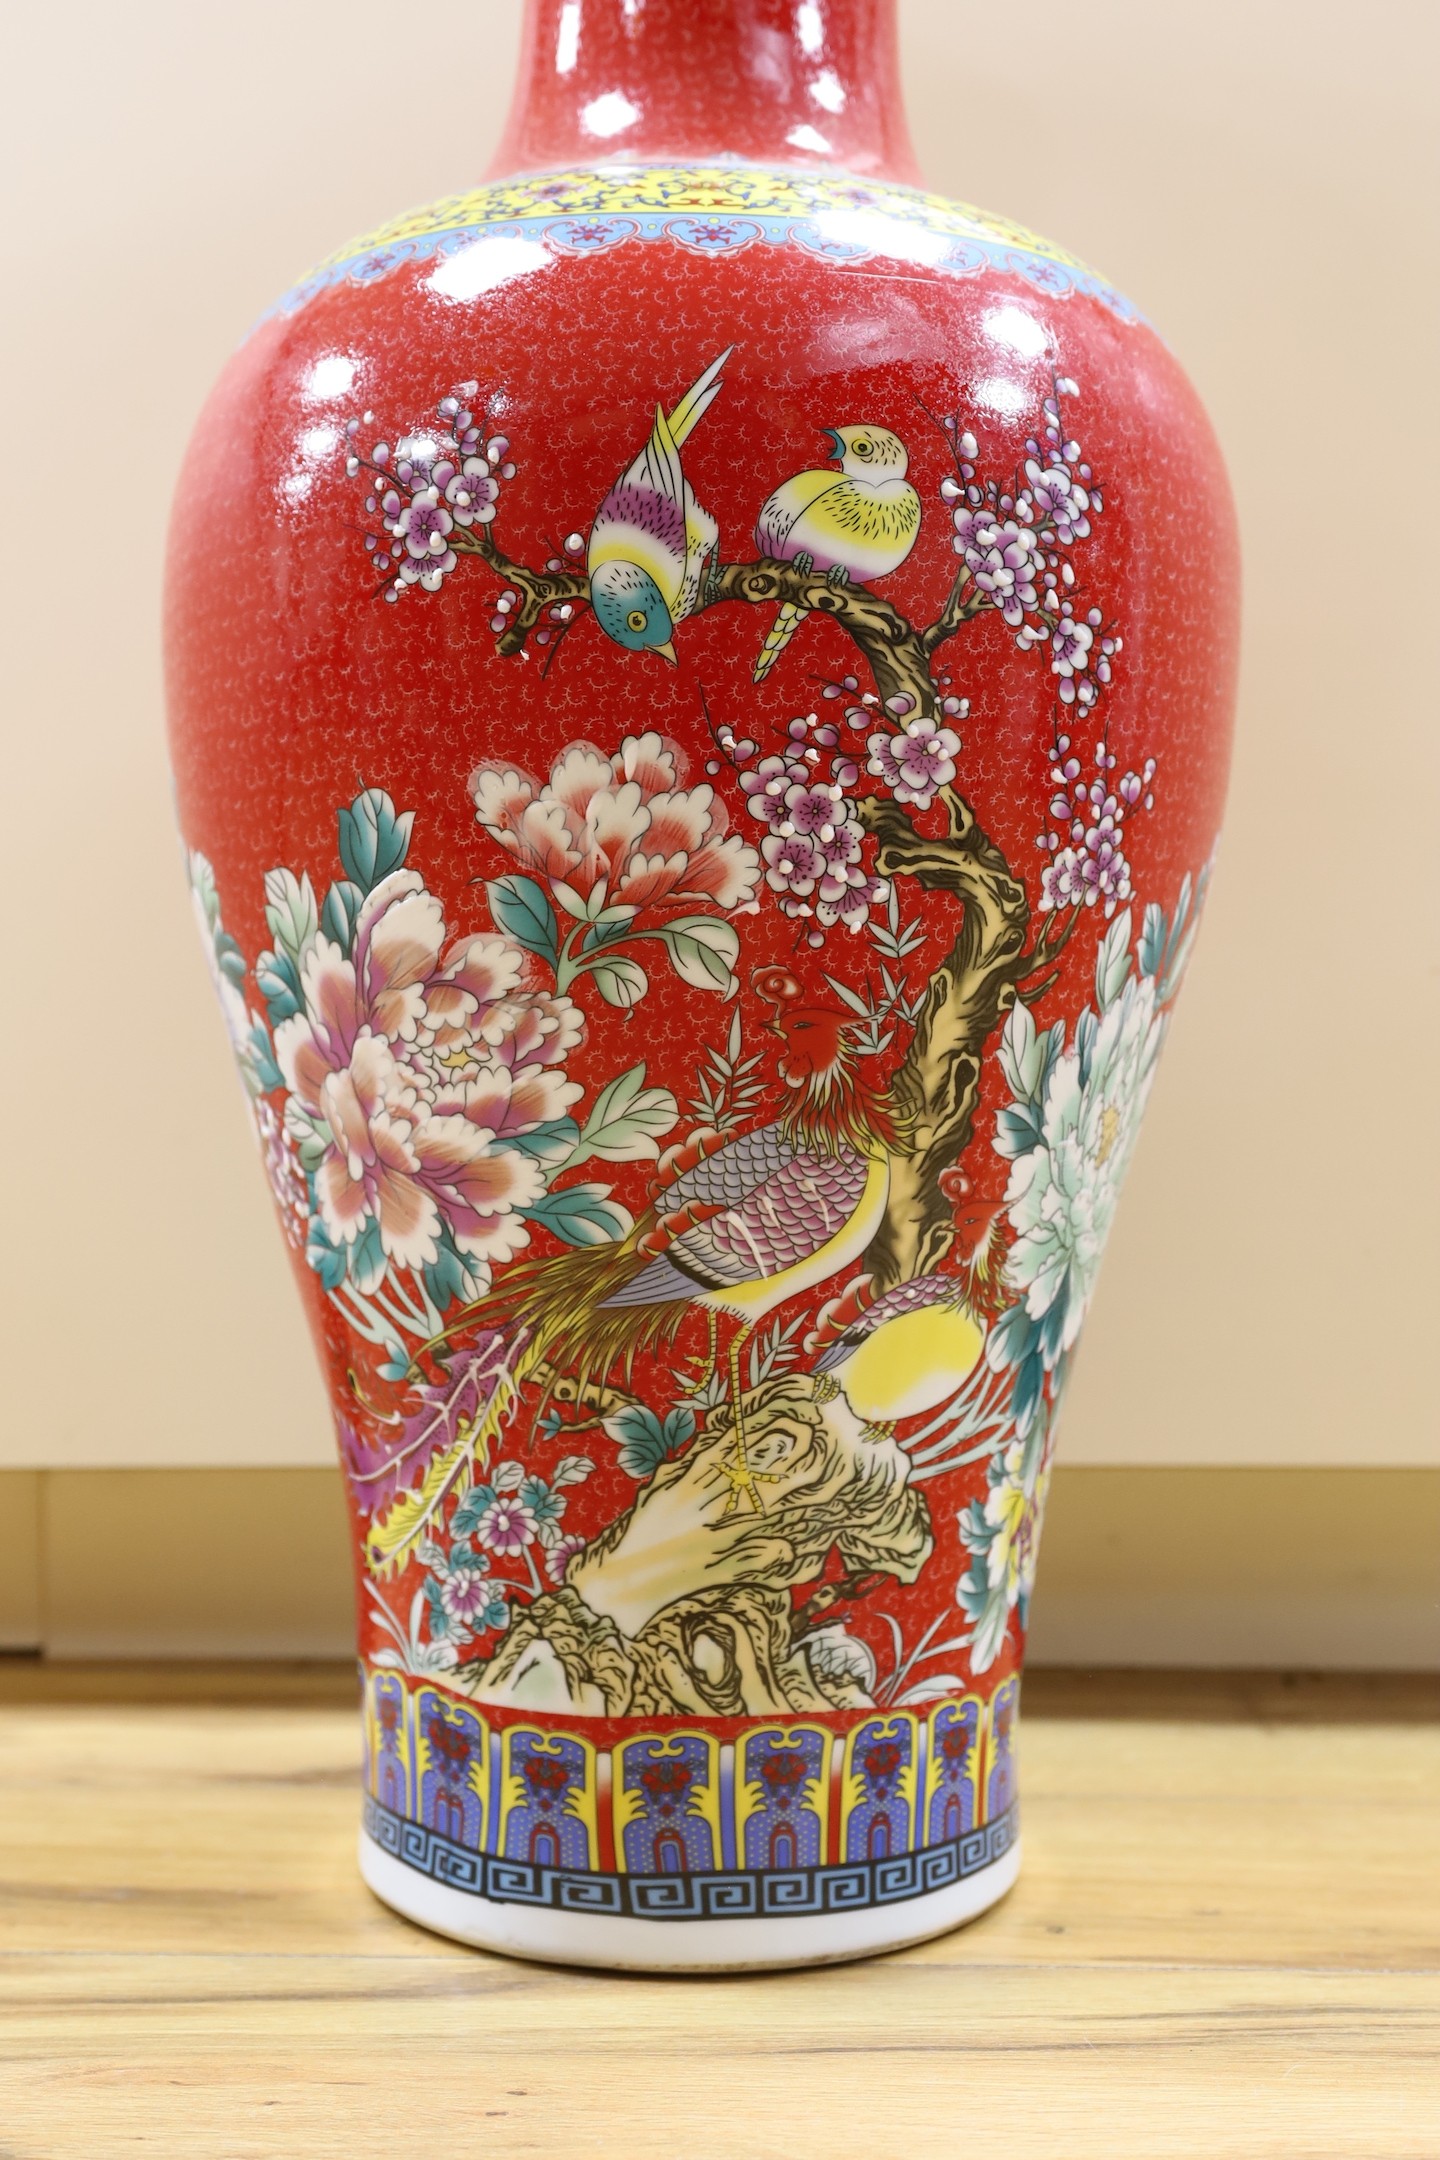 A large modern red ground Chinese vase with floral decoration - 68.5cm tall